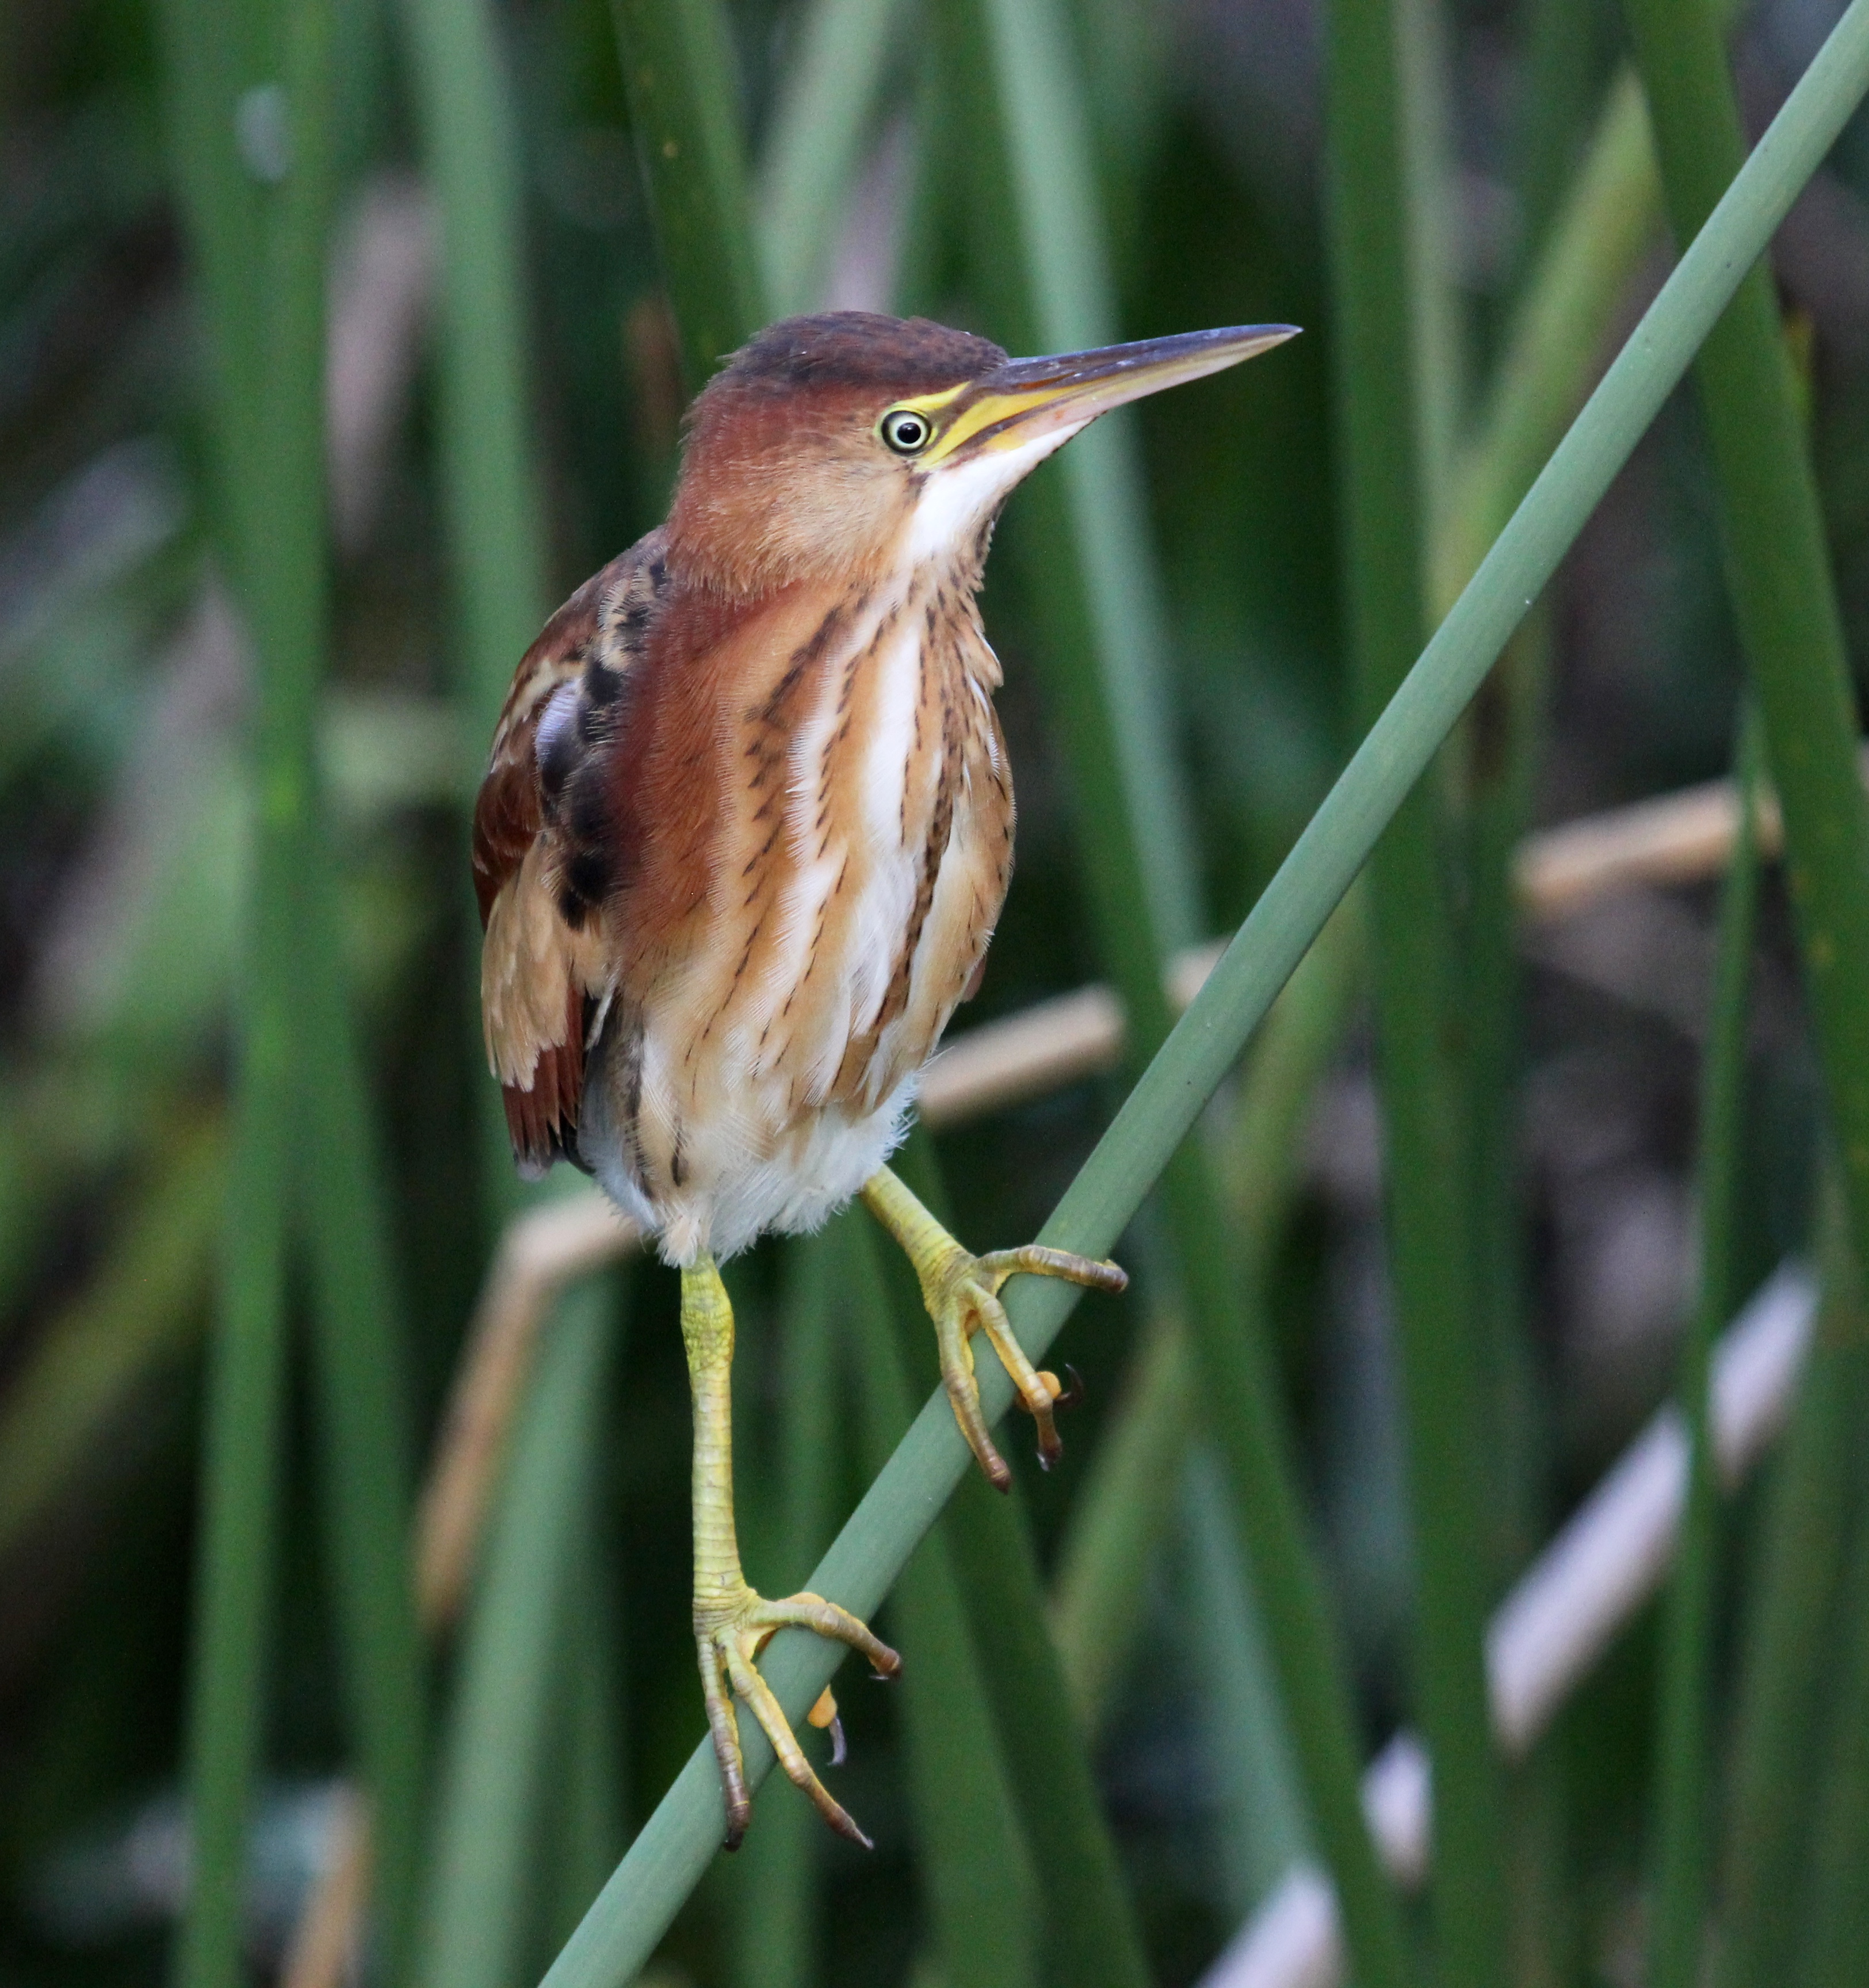 Private encounter with a Least Bittern | Birder's Journey